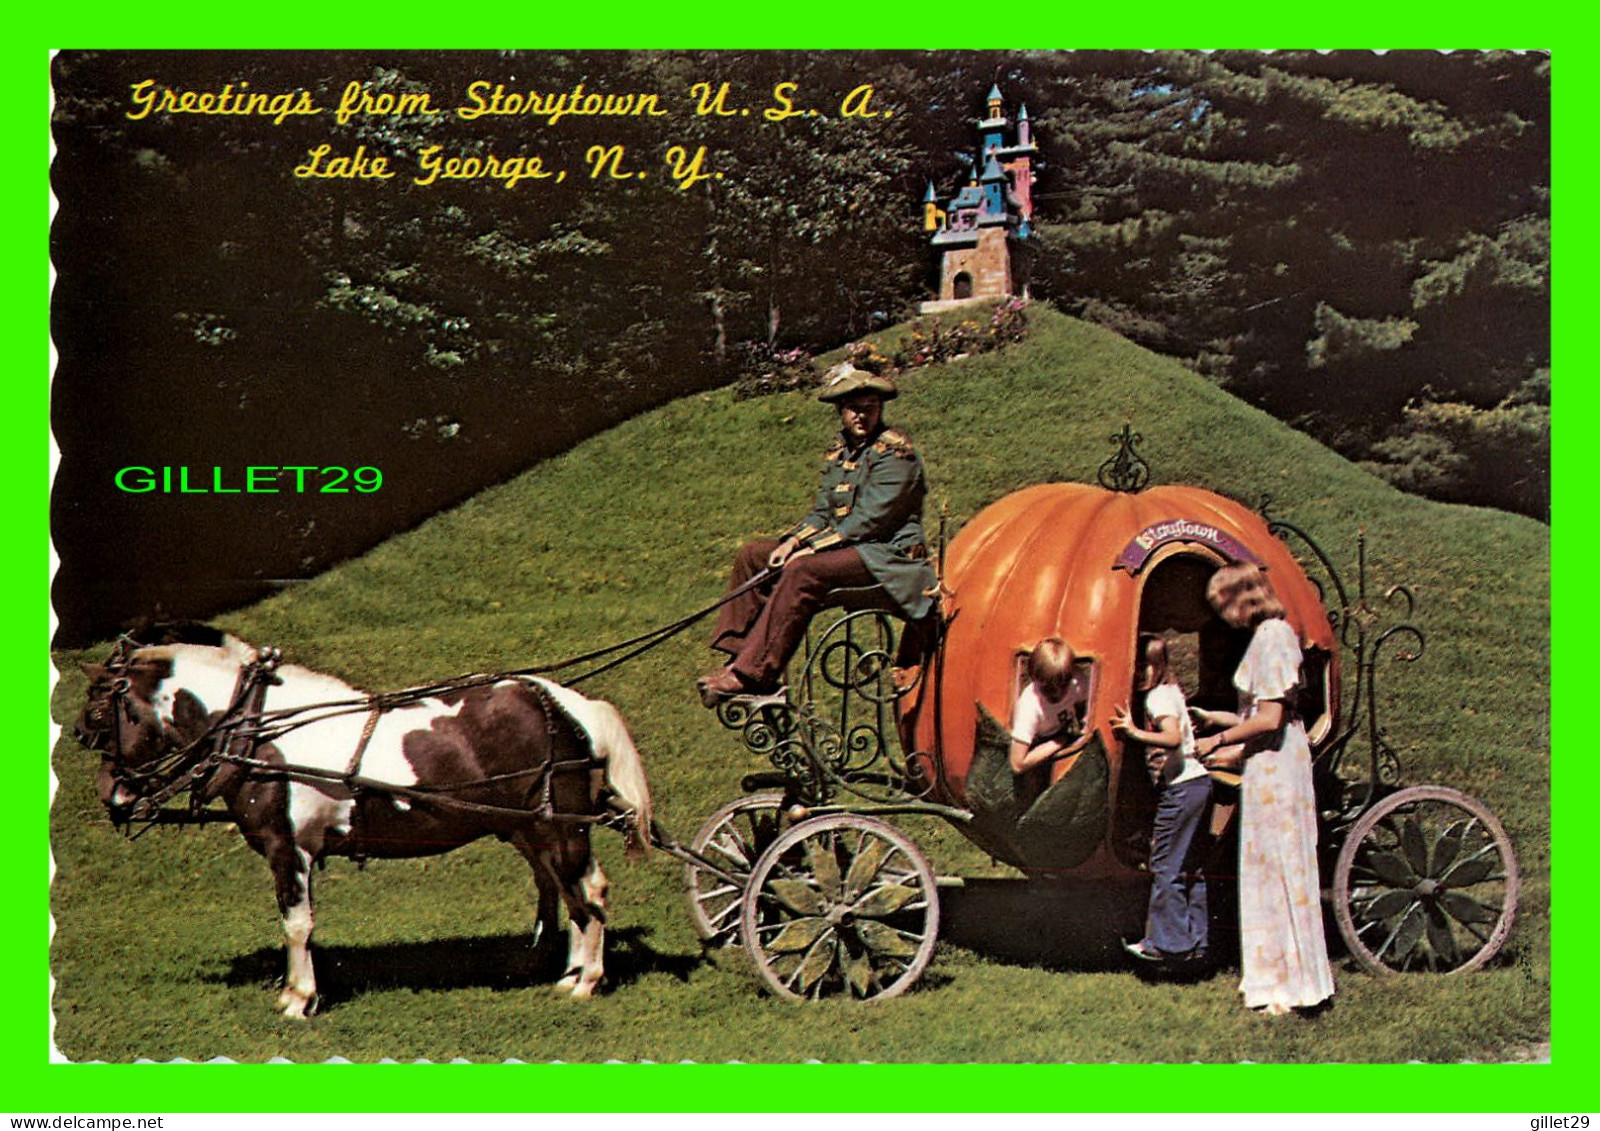 LAKE GEORGE, NY - GREETINGS FROM STORYTOWN - CIDERELLA'S COACH - DEXTER PRESS INC - PUB . BUY DEAN COLOR - - Lake George